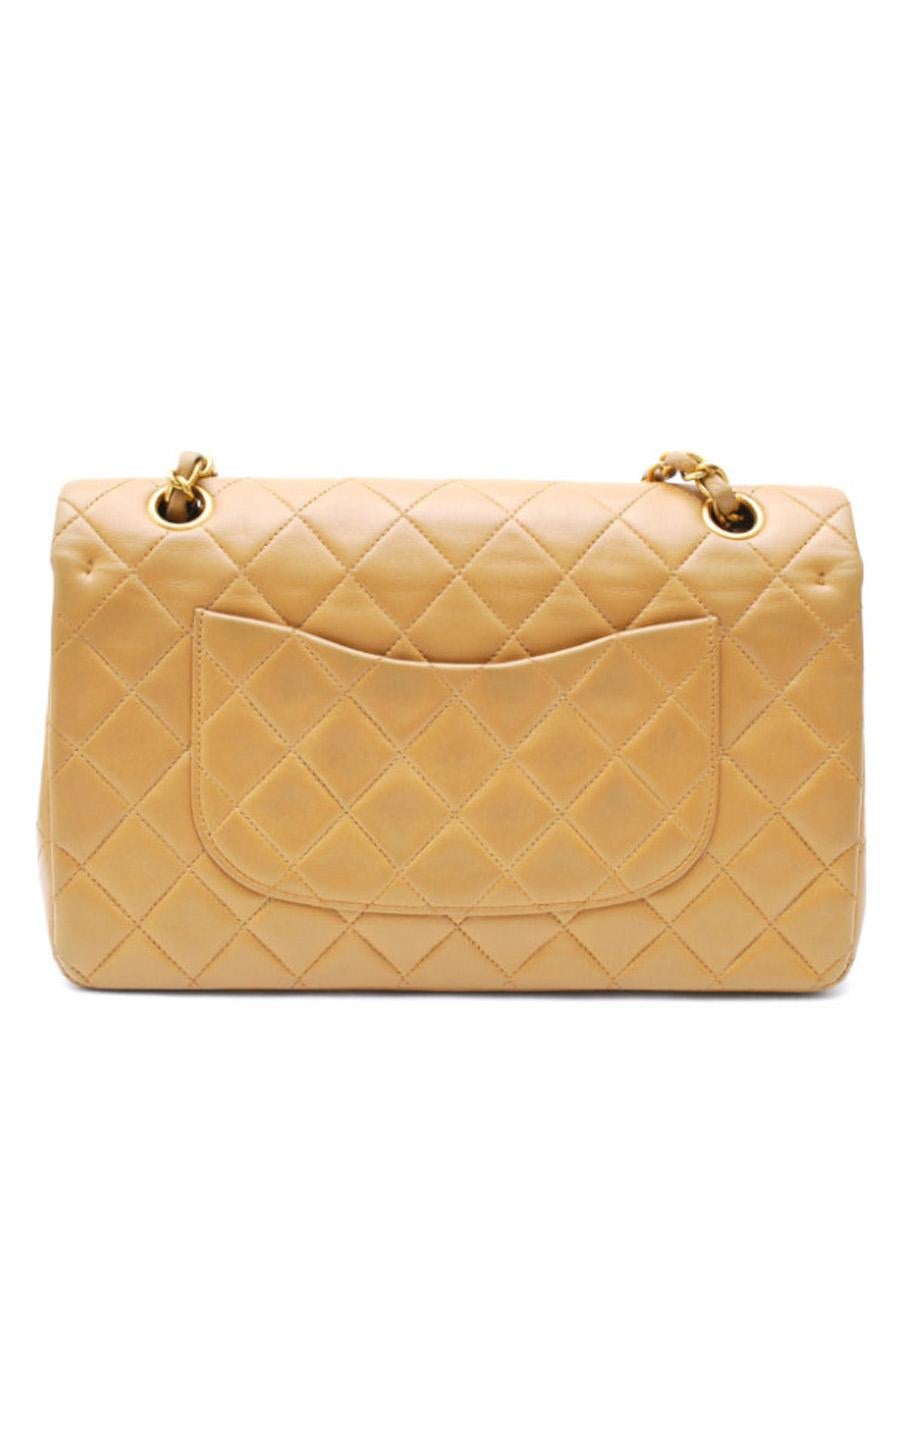 Chanel Timeless handbag in dark beige quilted leather

Condition : Very Good
Collection : Timeless
Model : Timeless Classic
Gender : Ladies
Color : Dark Beige
Material : Leather
Length : 25 cm
Height : 17 cm
Width : 7 cm
Category : Handbag
Shoulder